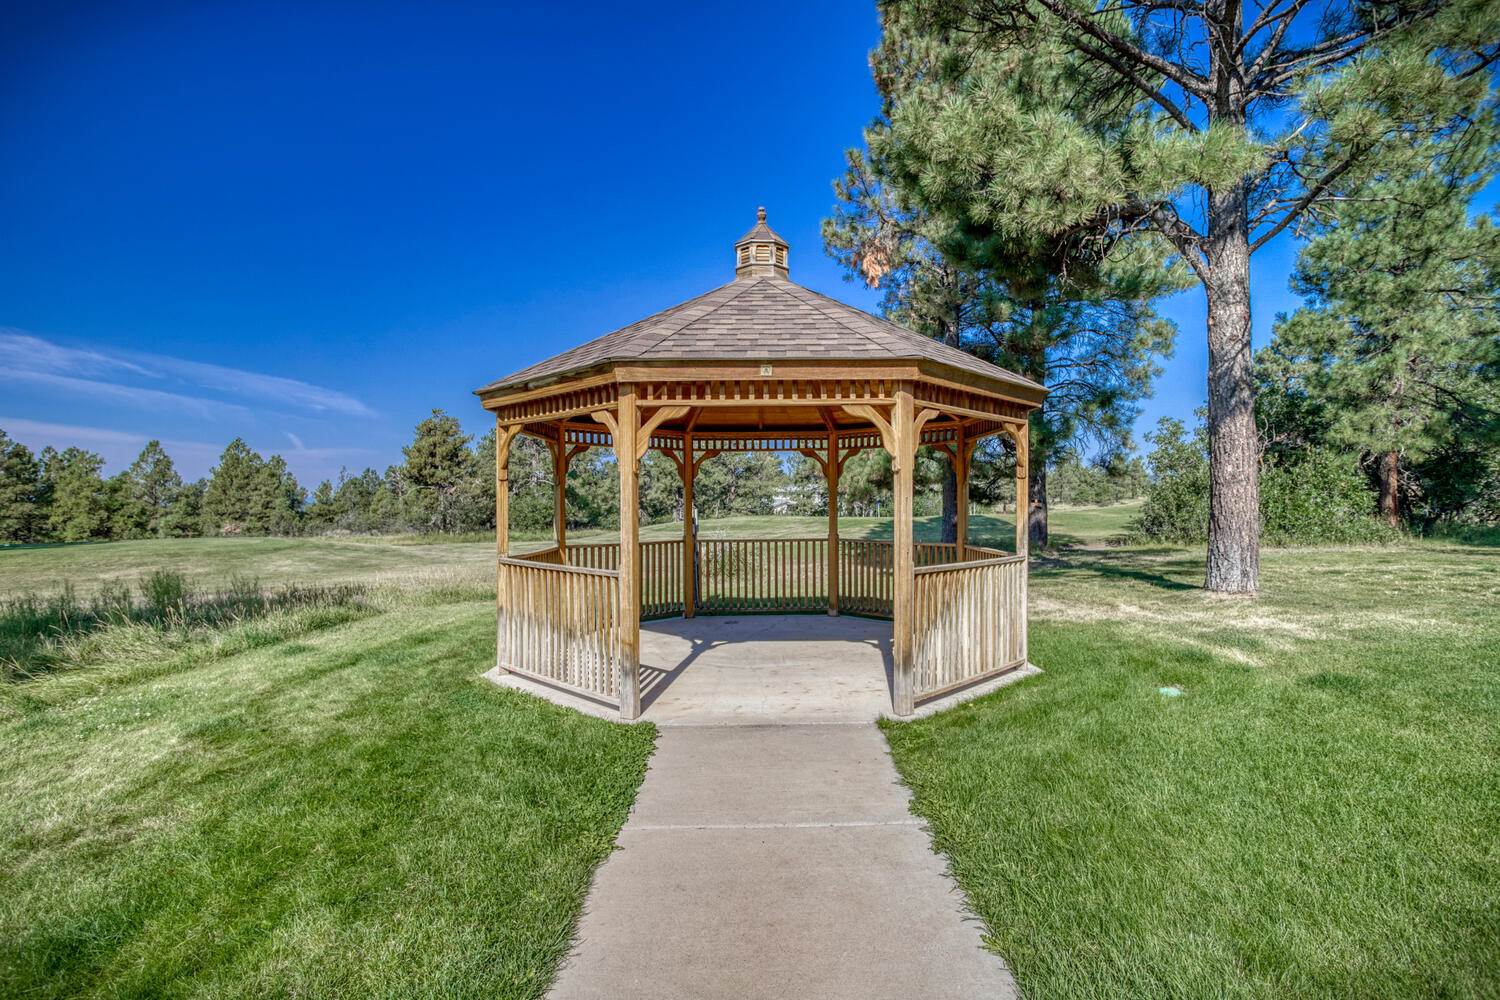 Golf Course Bliss, 109 Ace Ct. #303 - ST, Pagosa Springs, CO 81147